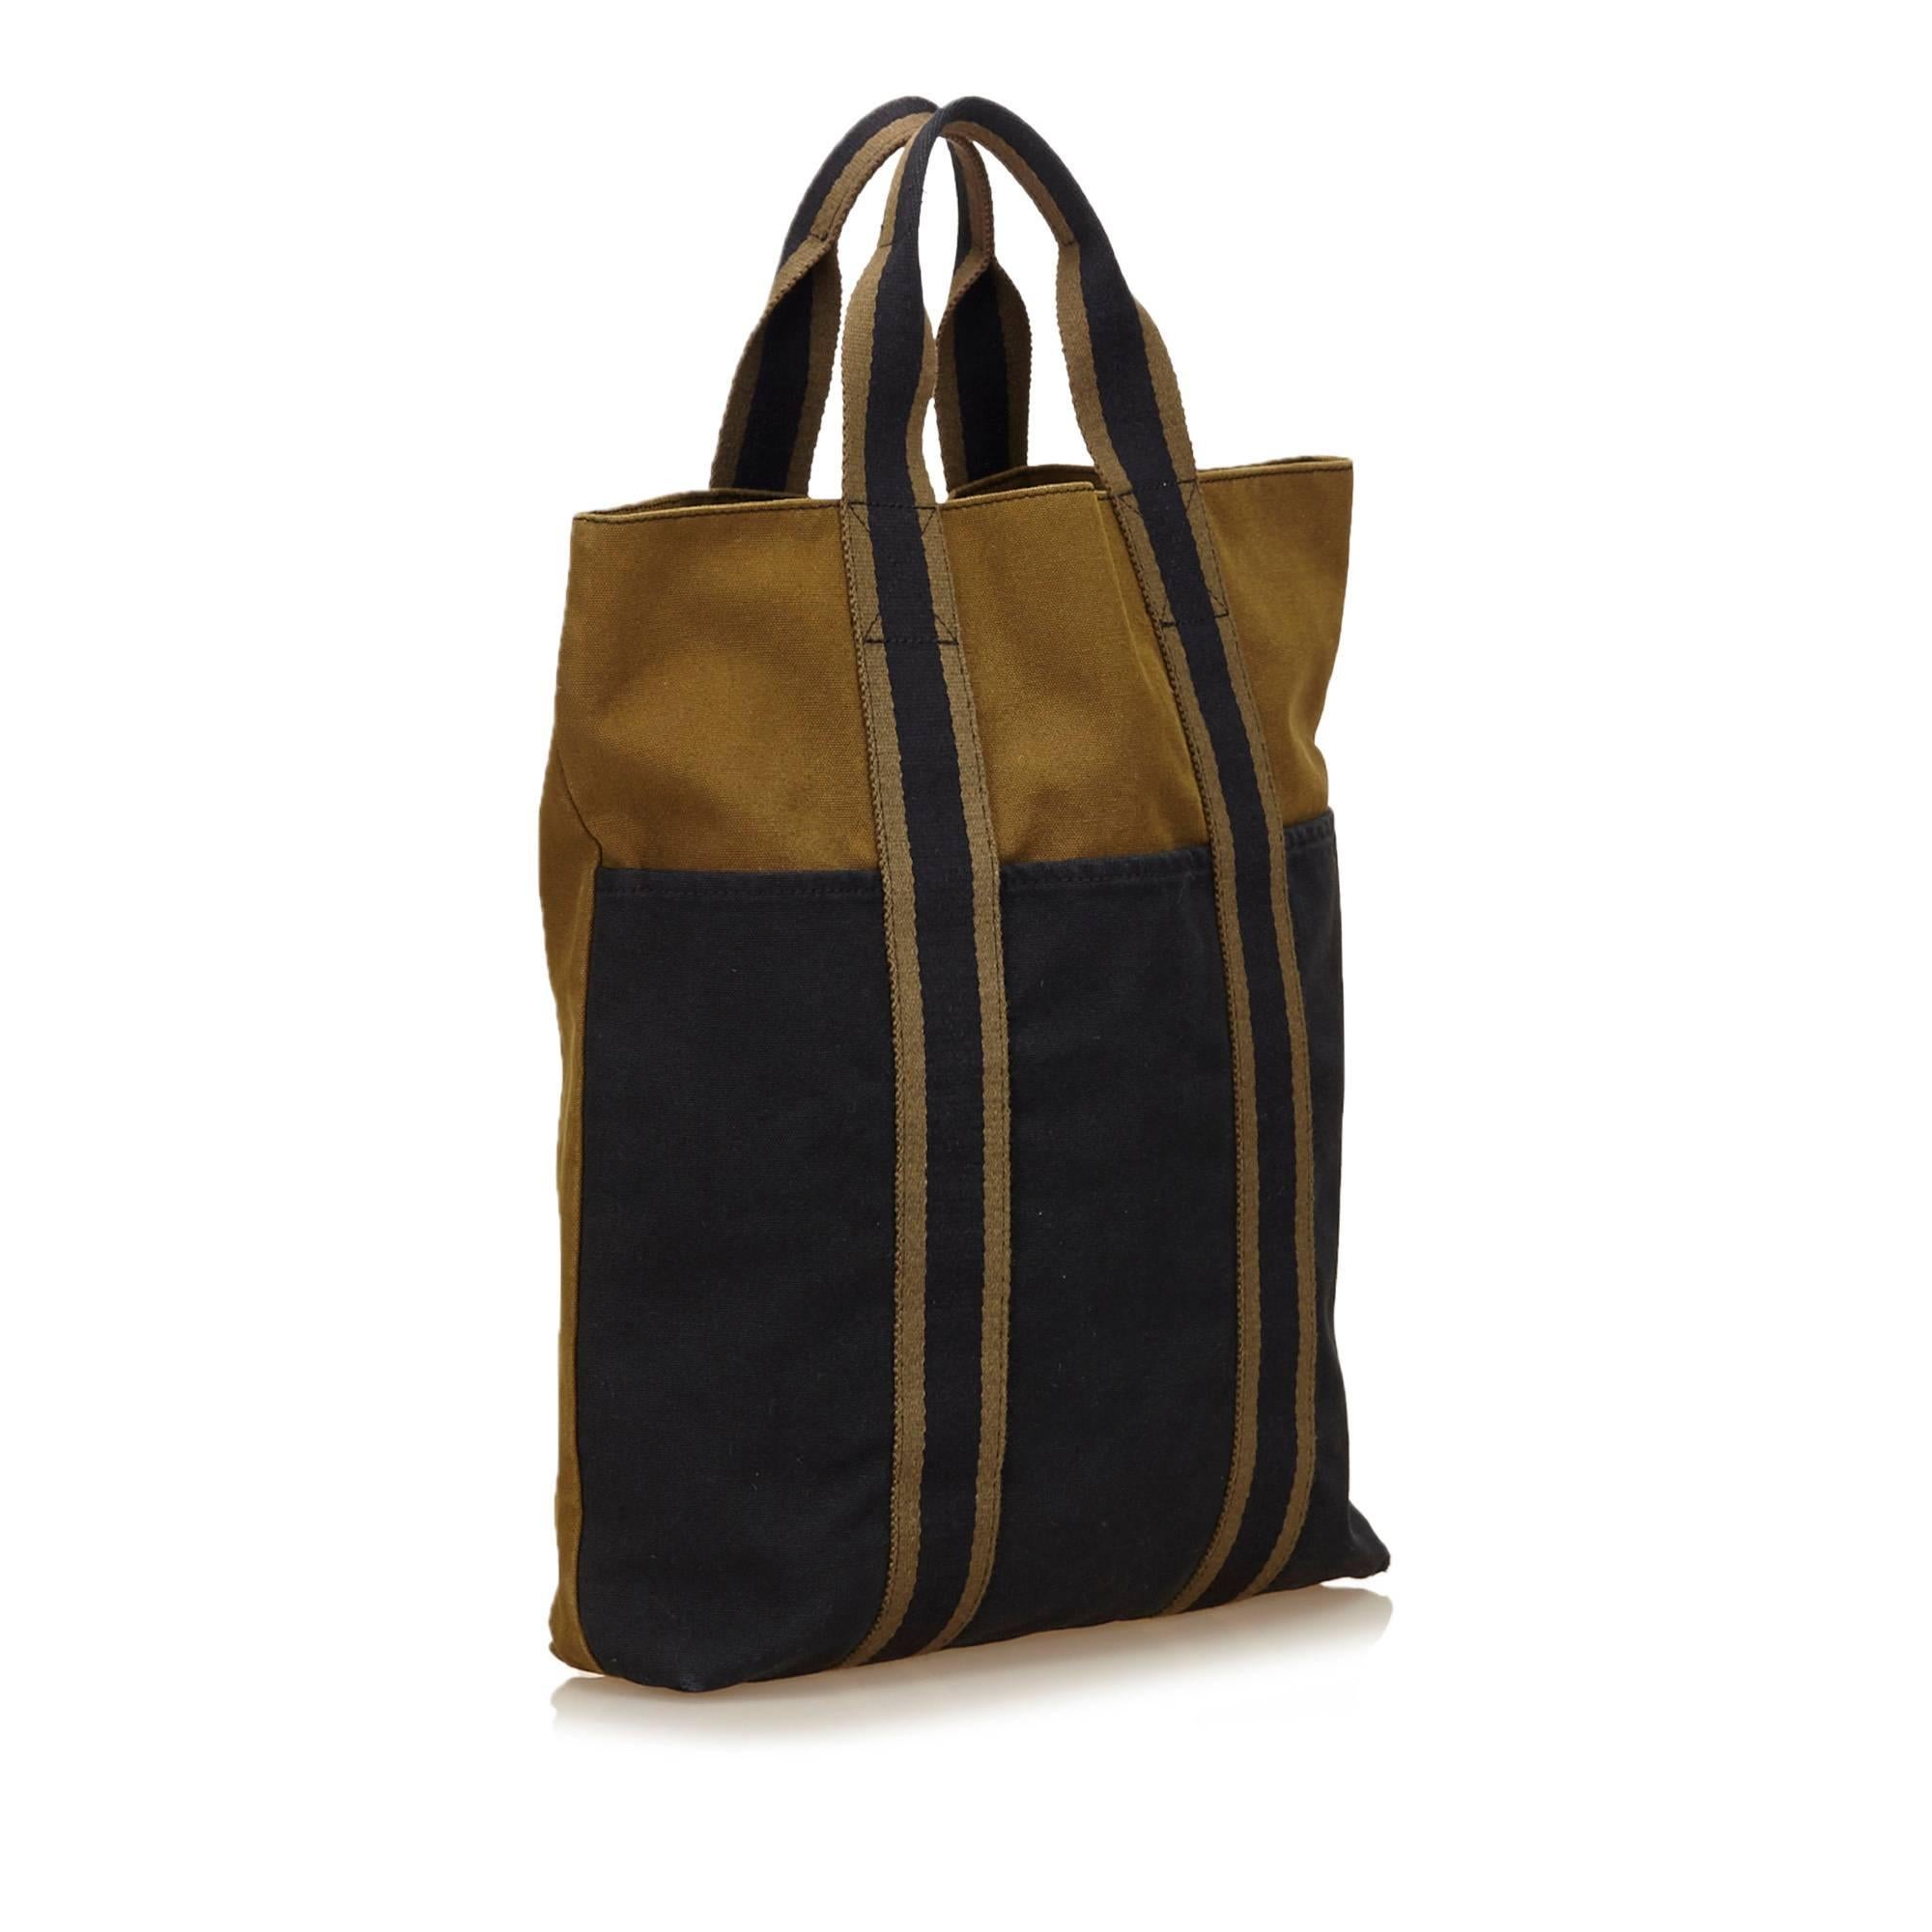 The Fourre Tout Cabas tote features a canvas body, exterior slip pockets, an open top, and an interior slip pocket. It carries a B condition rating.

Inclusions: 
This item does not come with inclusions.